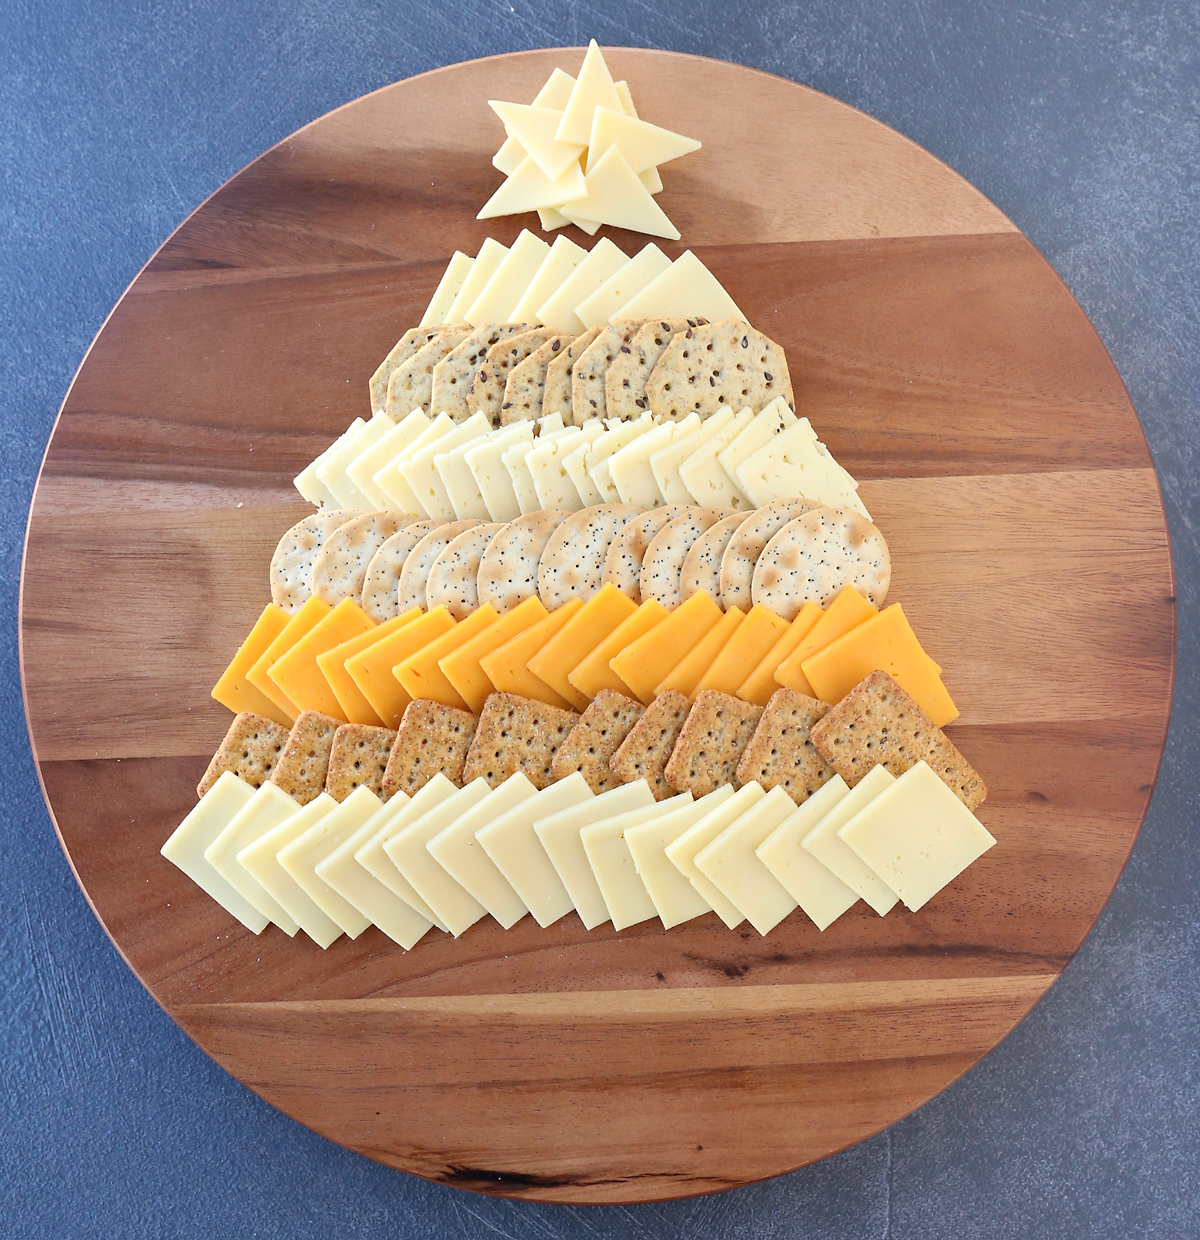 Cheese slices and crackers arranged in triangle Christmas tree shape